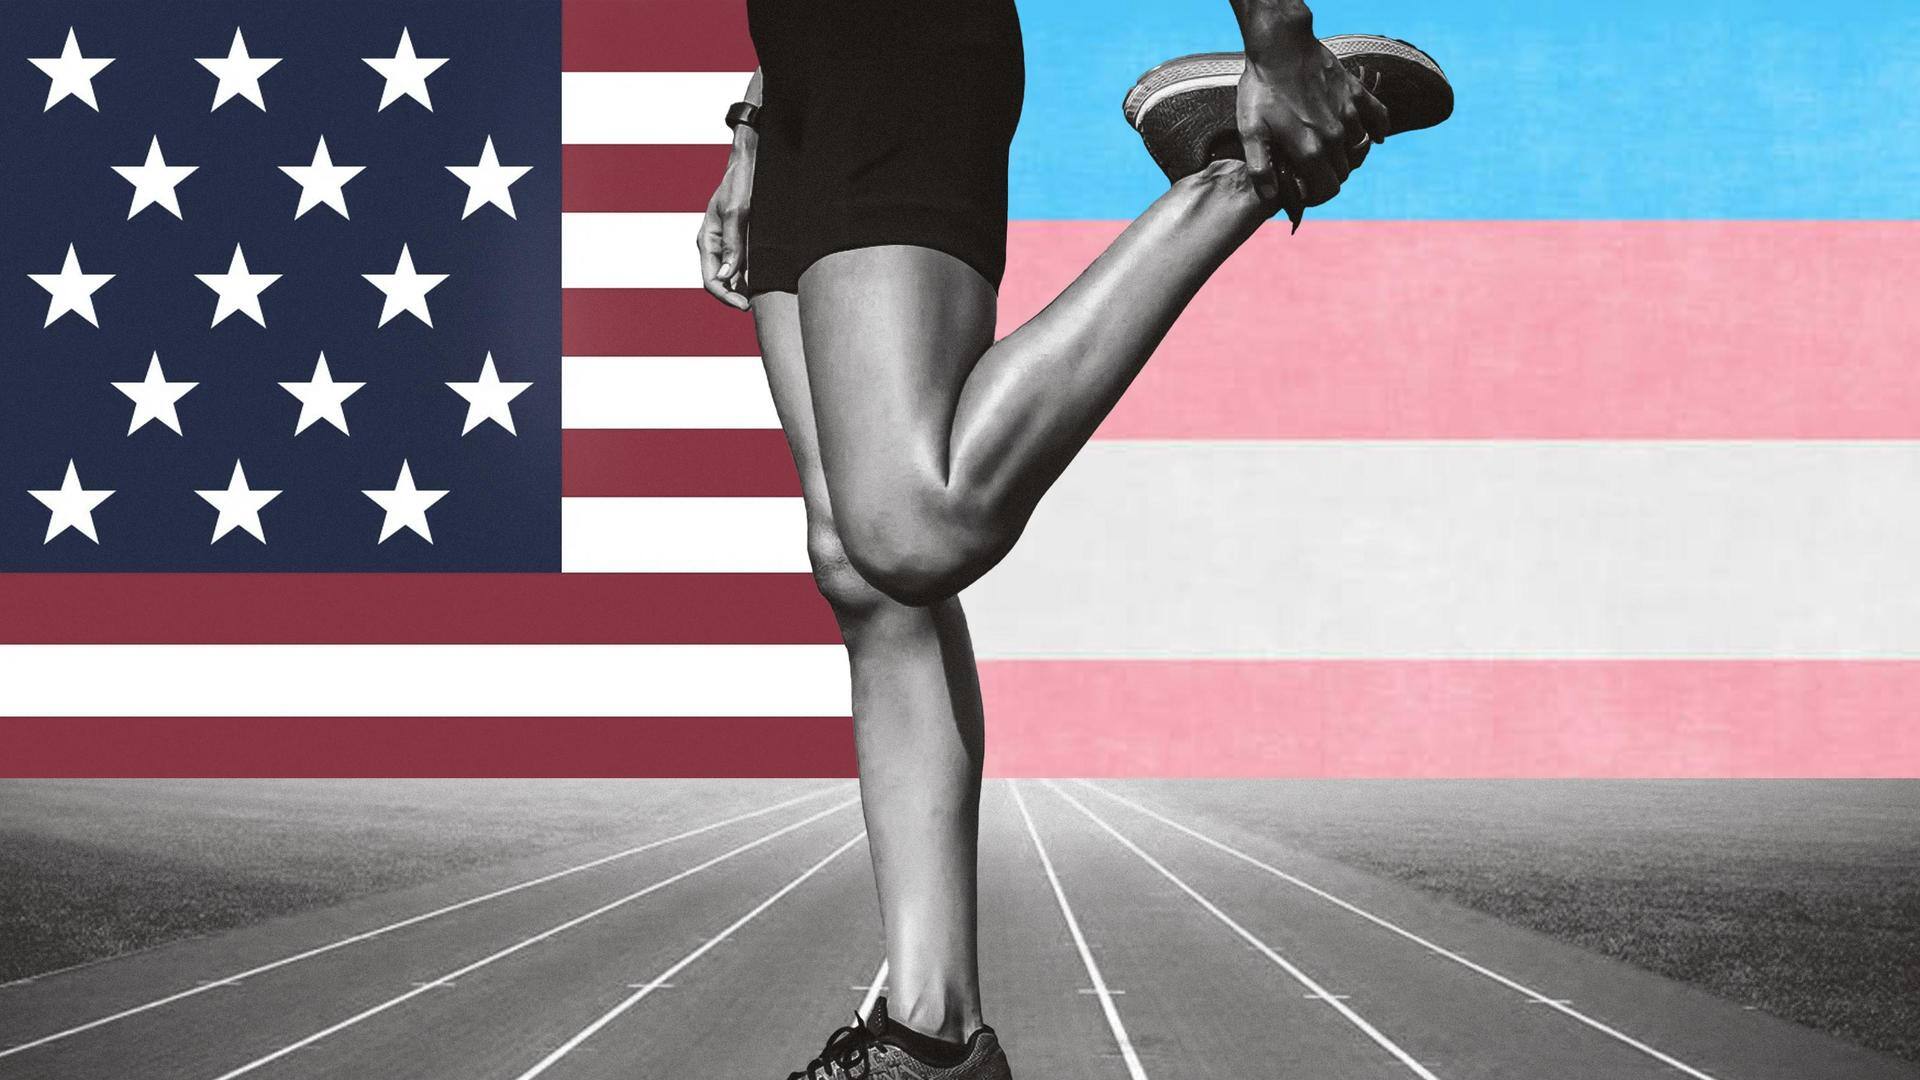 US: Bill passed to ban transgender athletes from female teams